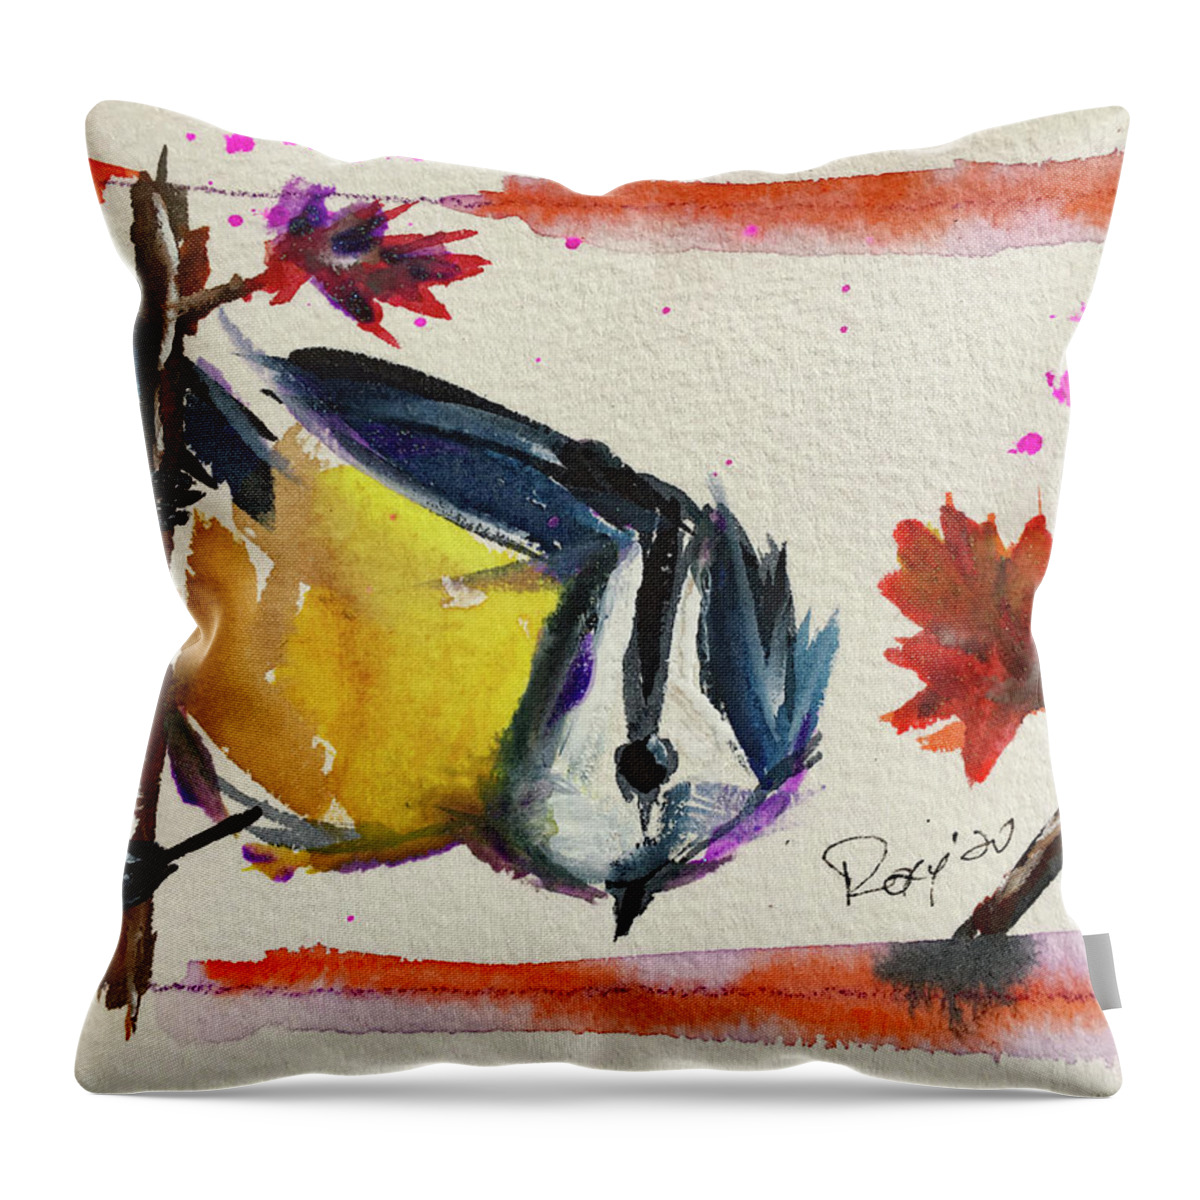 Blue Tit Throw Pillow featuring the painting Blue Tit by Roxy Rich